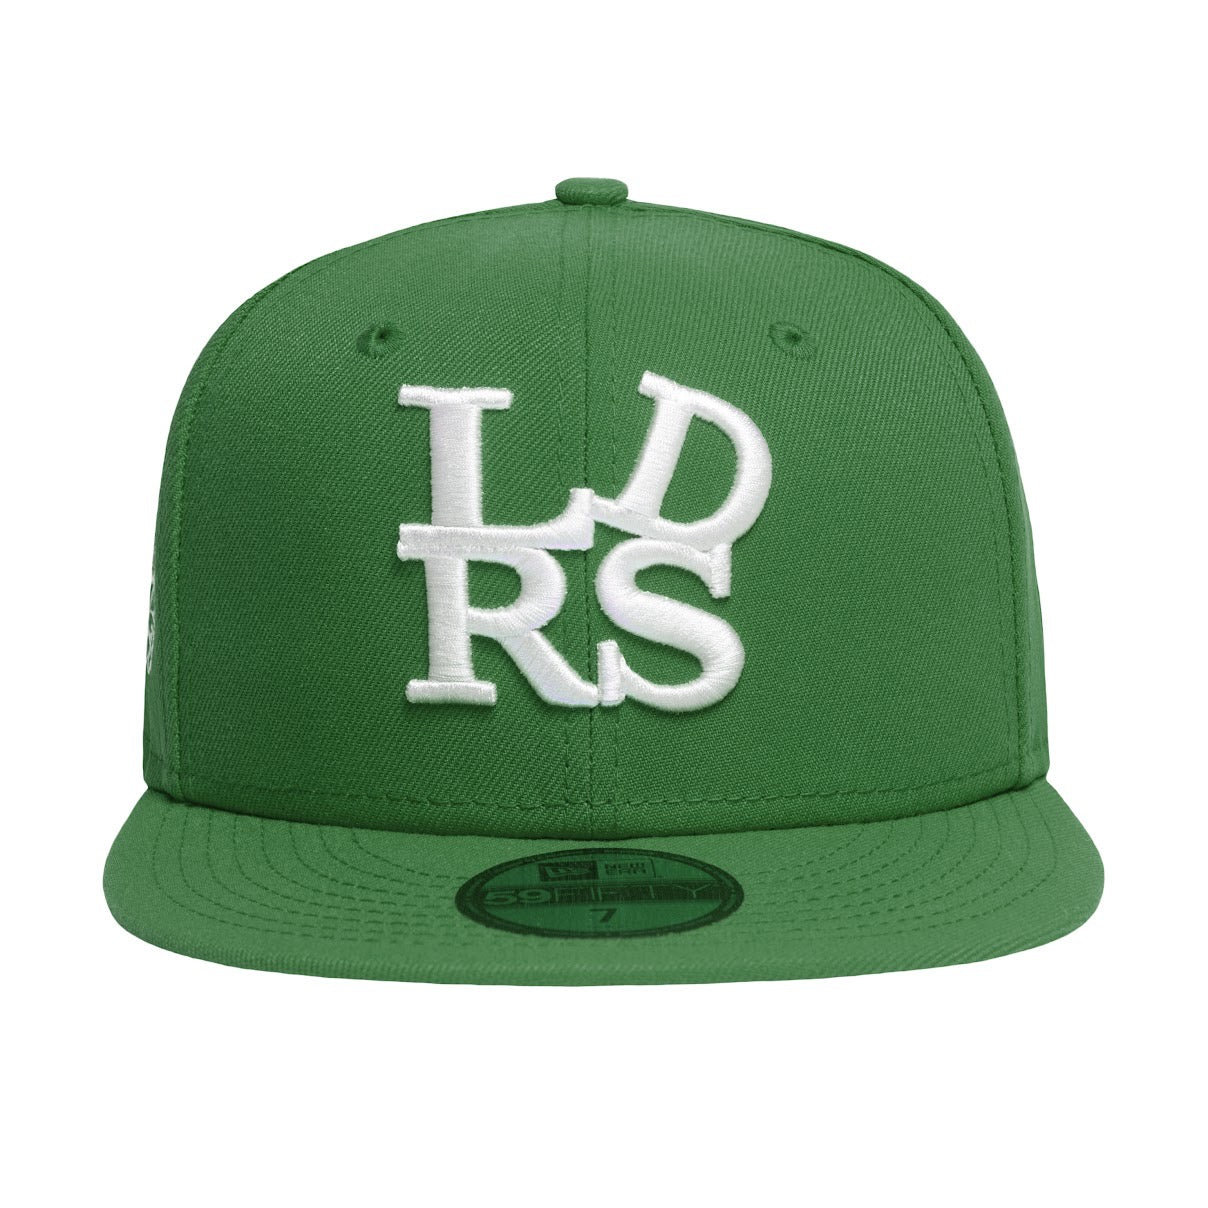 Kelly Green OG Fitted Hat – Leaders 1354